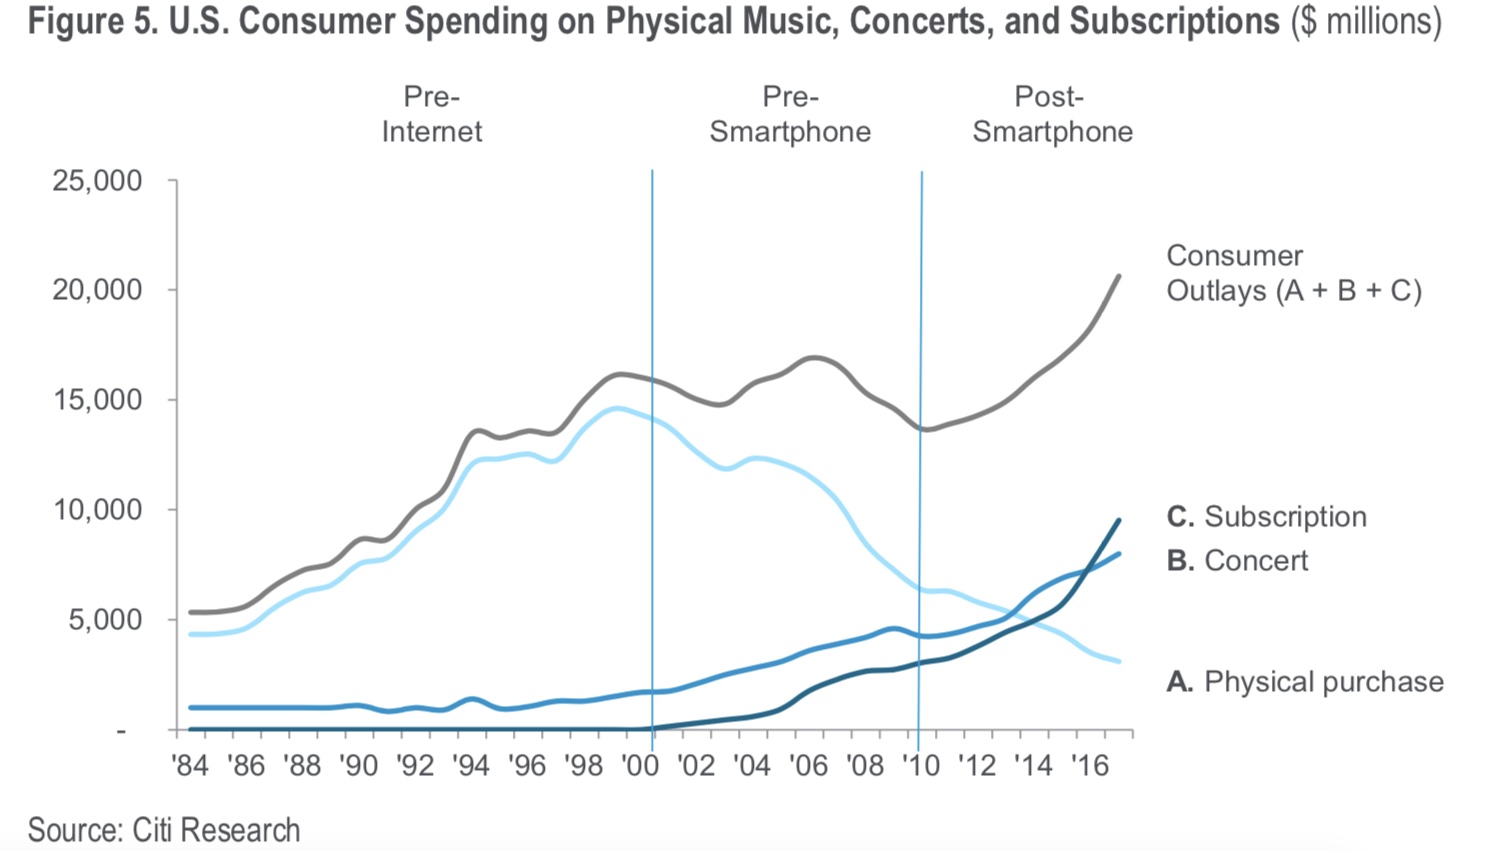 Chart: Figure 5. U.S. Consumer Spending on Physical Music, Concerts, and Subscriptions ($ millions). Consumer spending on subscription and concert steadily rise after 2010 and the advent of smart phones, physical purchase steadily declines after 2000.